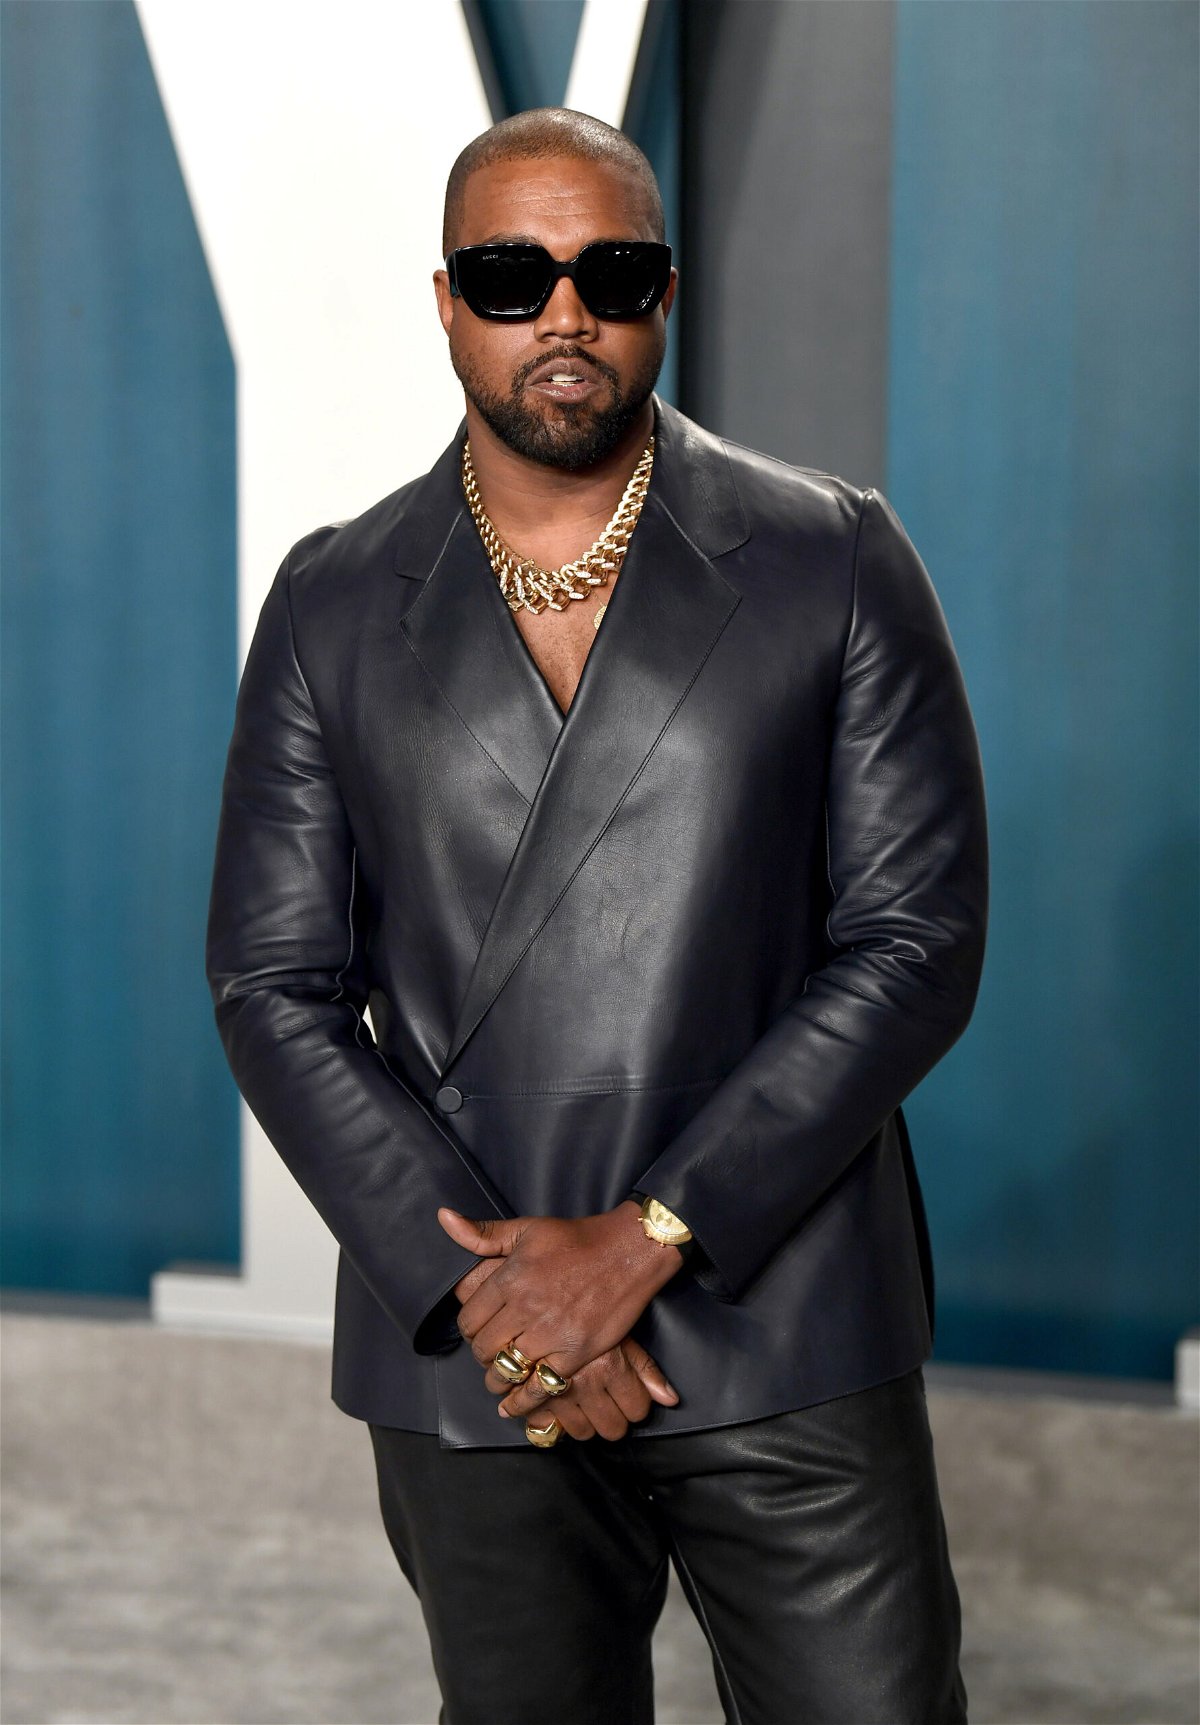 <i>Karwai Tang/Getty Images</i><br/>Kanye West filed for legal permission to change his name back in August.